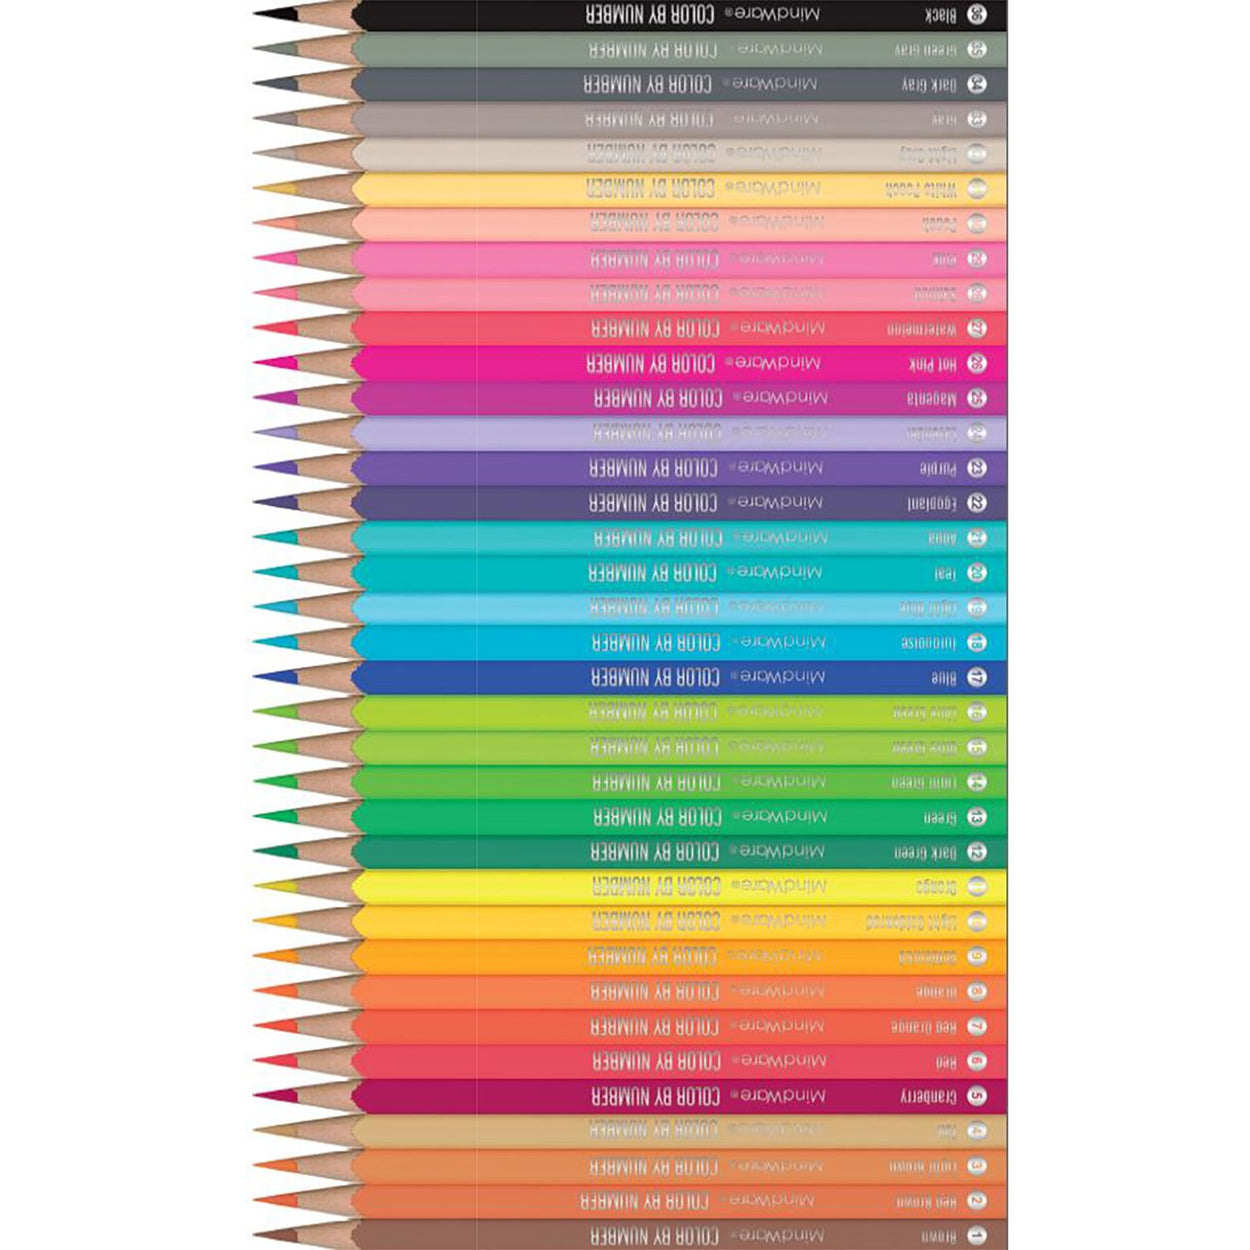 Set of 36 Color by Number Colored Pencils in a Tin